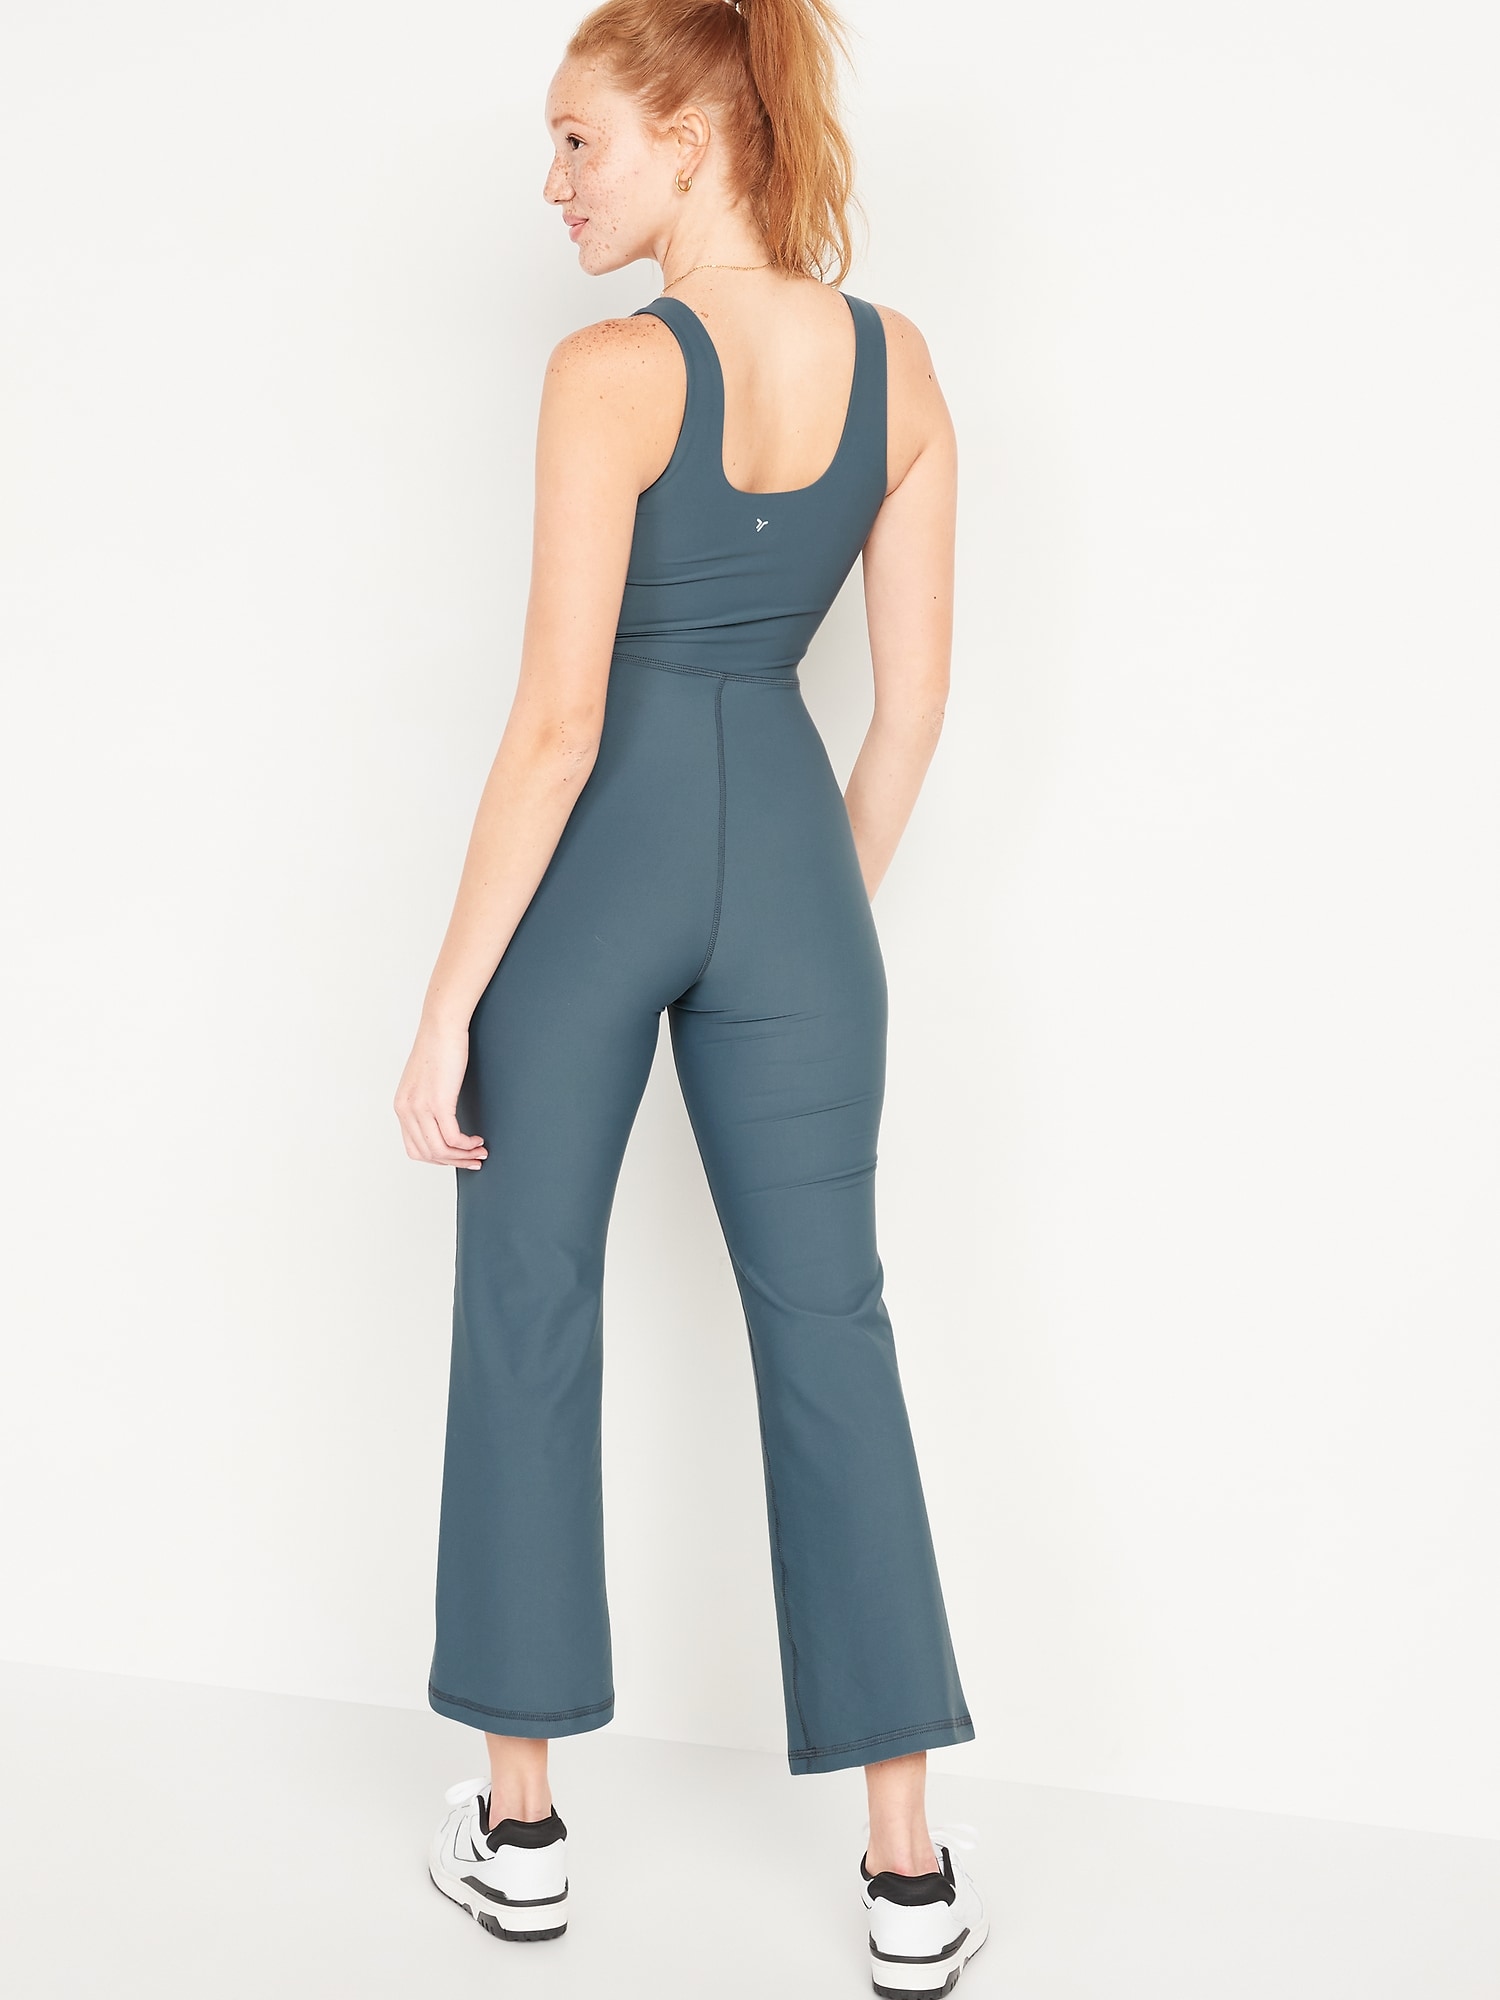 Old Navy Sleeveless PowerSoft Flared Jumpsuit for Women